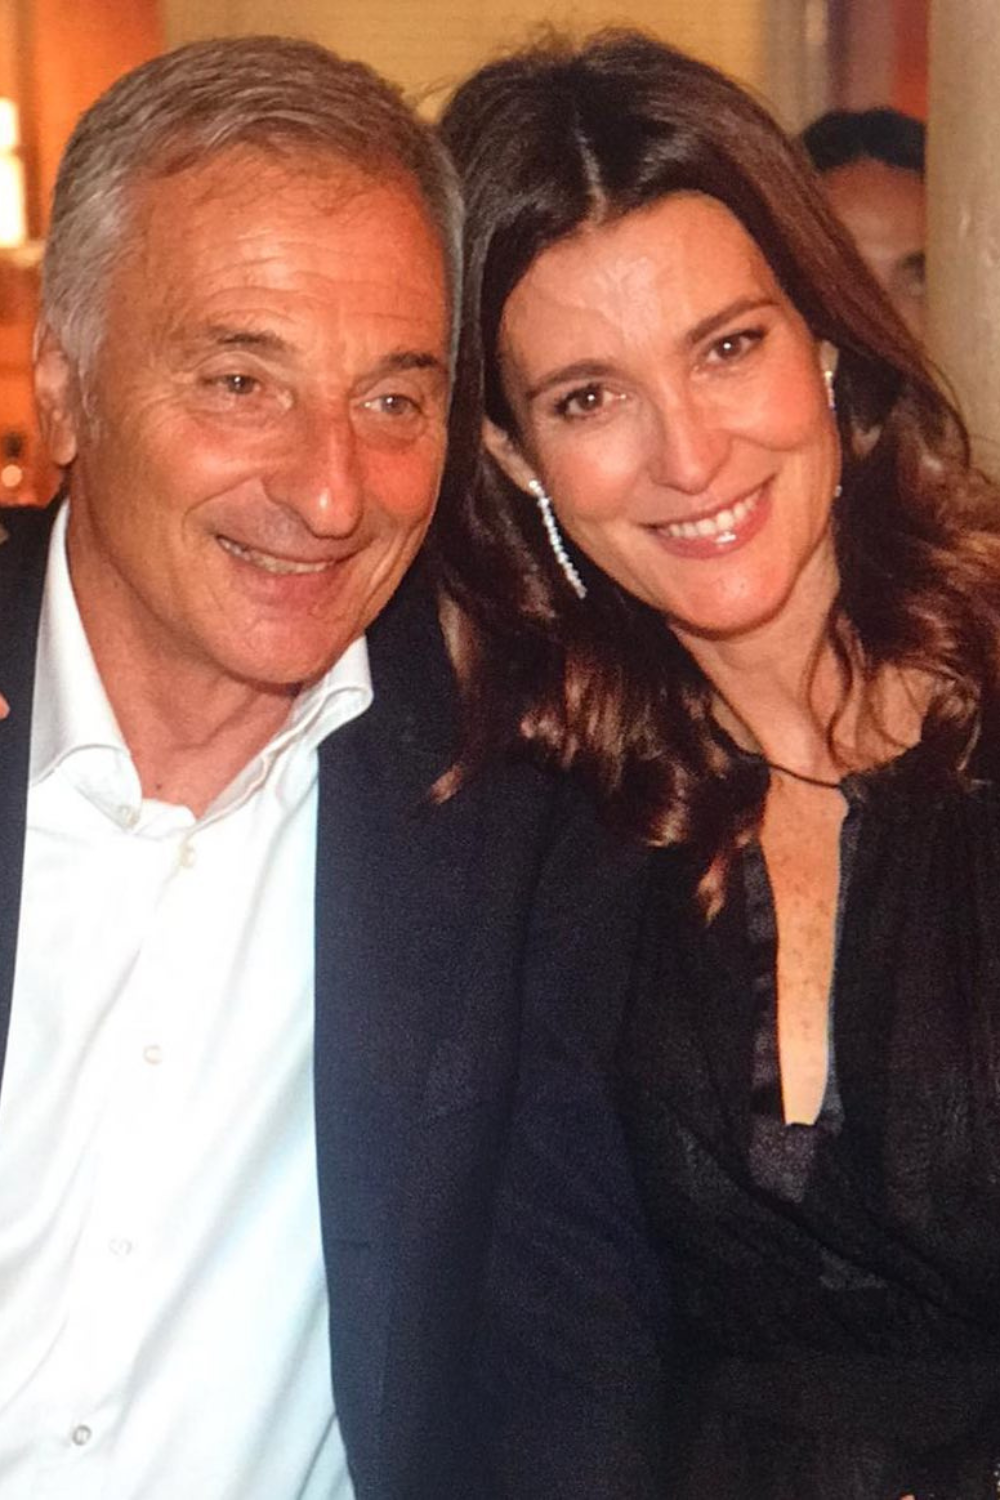 Riccardo Patrese Posted A Picture With His Wife Francesco On Their 20th Anniversary